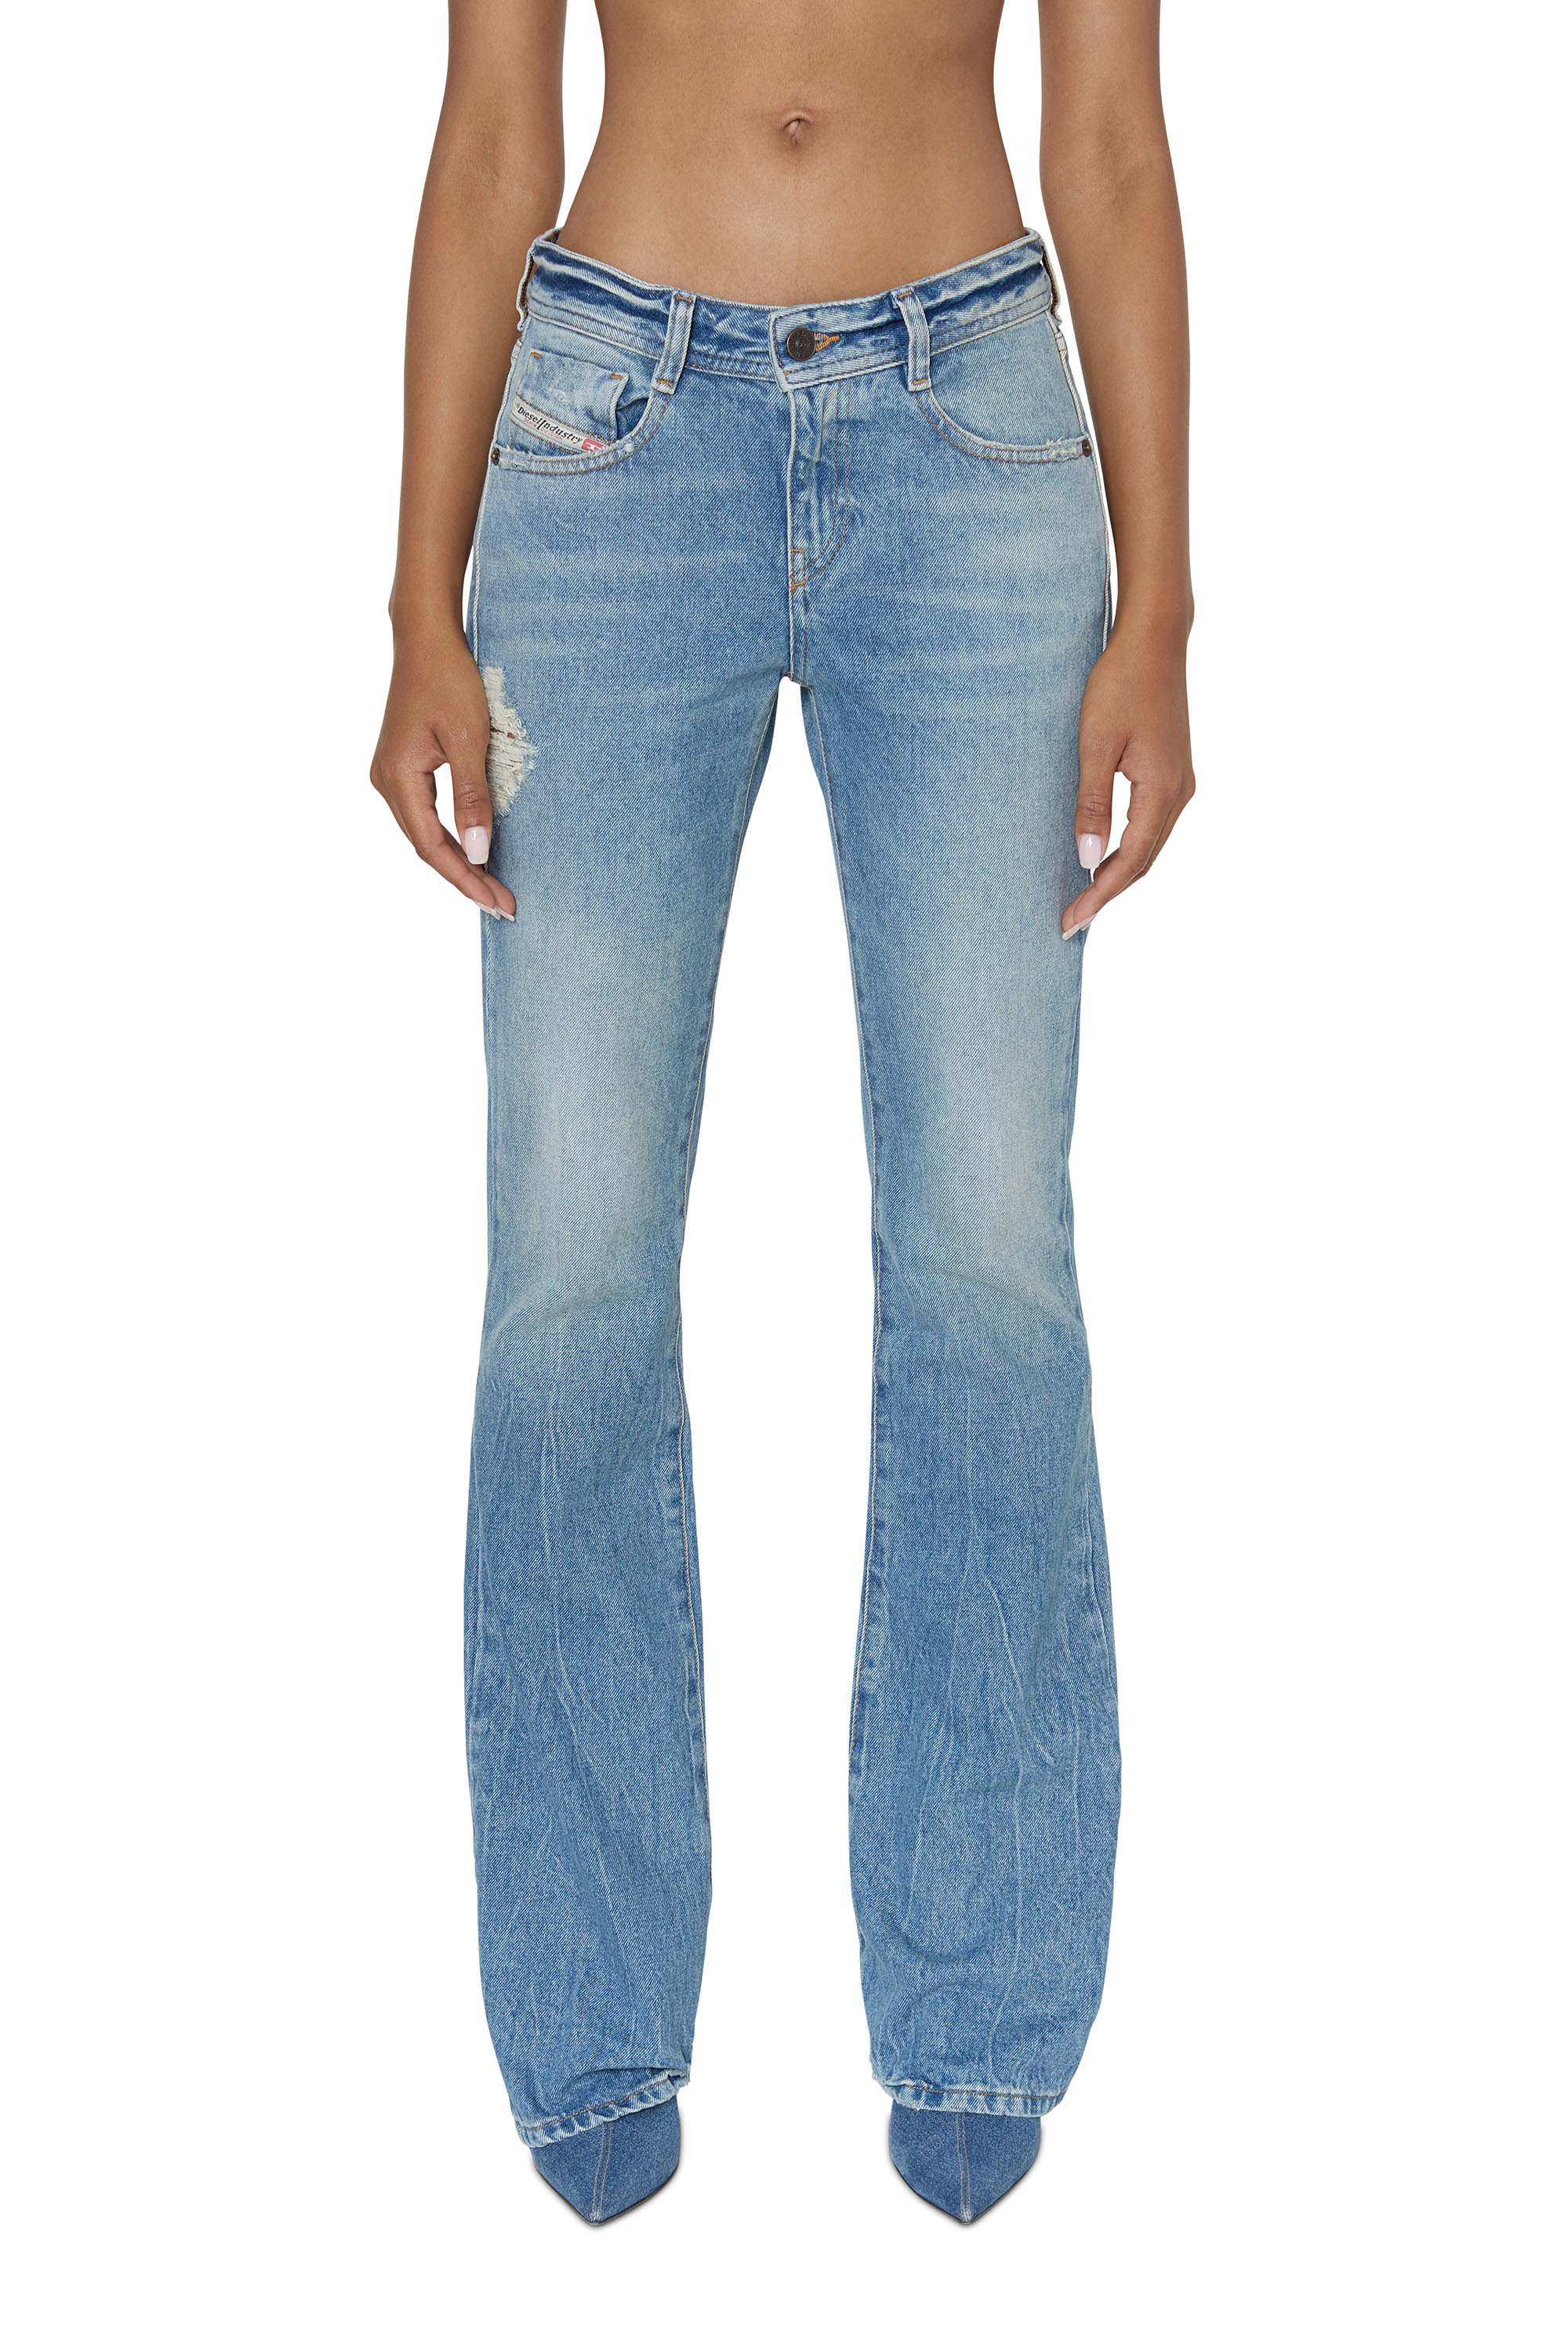 1969 D-EBBEY 09D98 Bootcut and Flare Jeans, Medium blue - Jeans